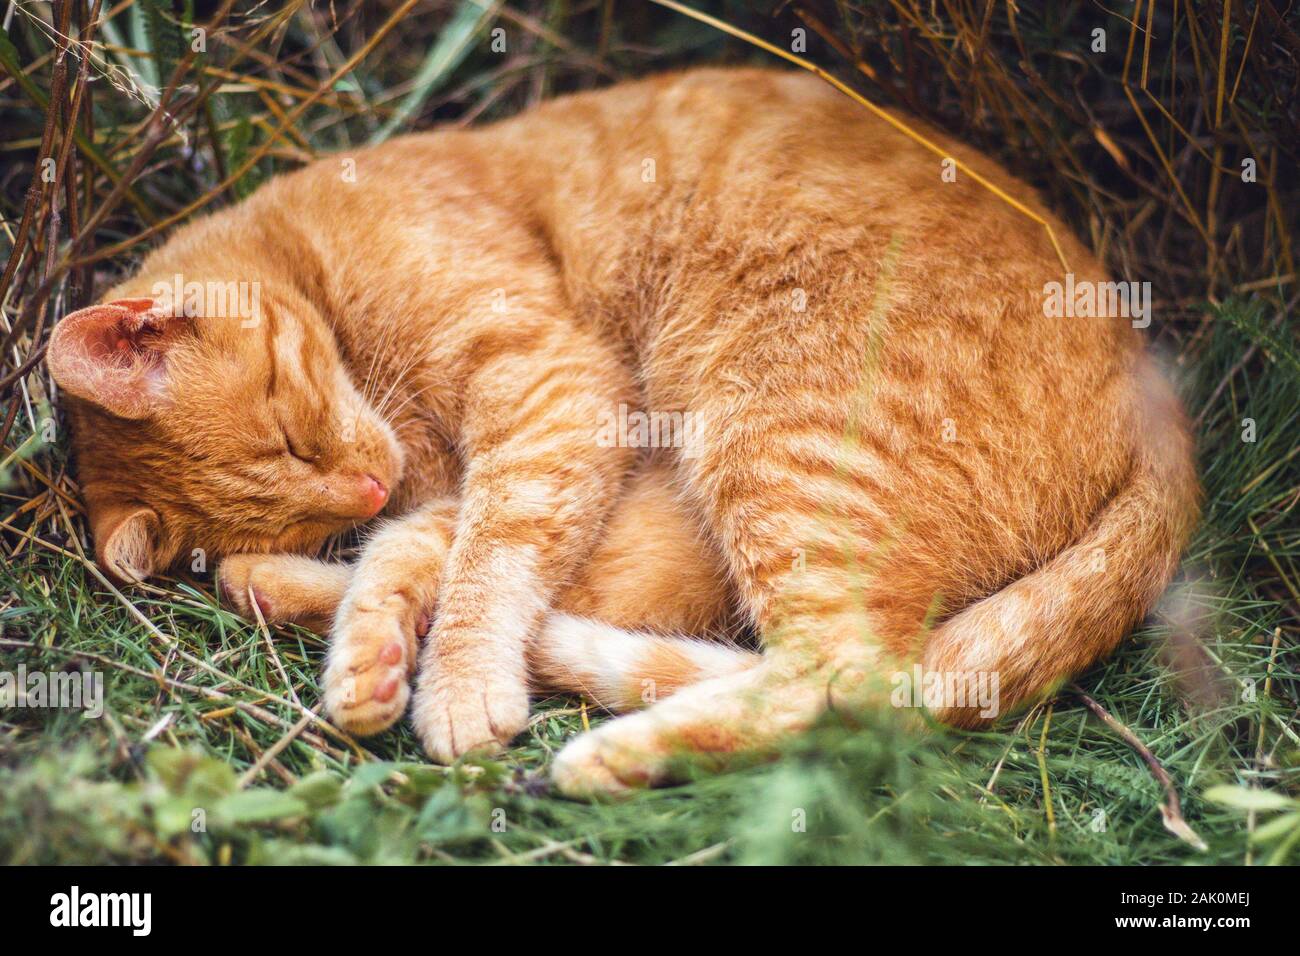 Sleeping red cat - on a hot summer day she is hidden in a shade in a flower bed and resting Stock Photo